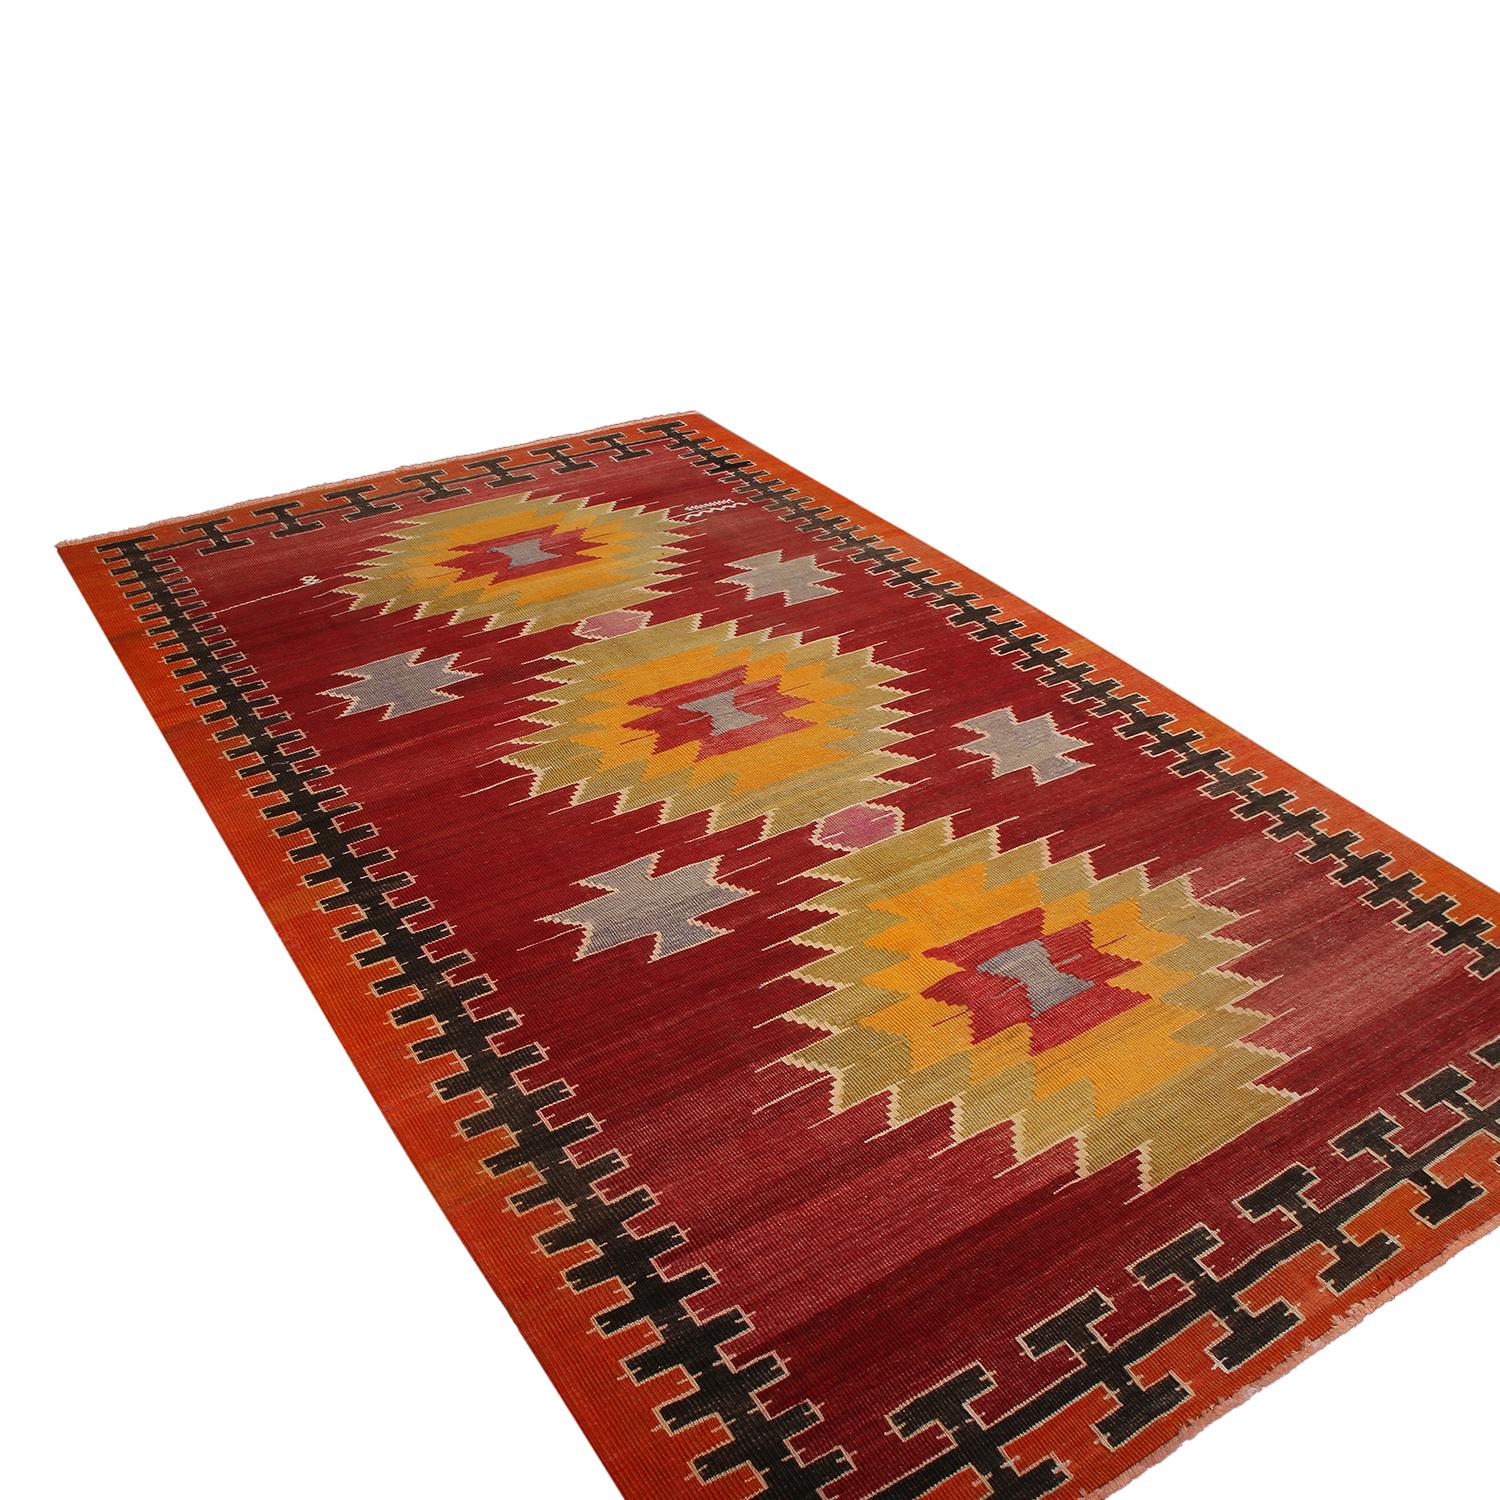 flat-woven in Turkey originating between 1950-1960, this vintage midcentury Mut Kilim rug presents a lively tribal array of red, orange, green, yellow and blue hues in the colorway highlighting the tastefully abrashed background with a crisp